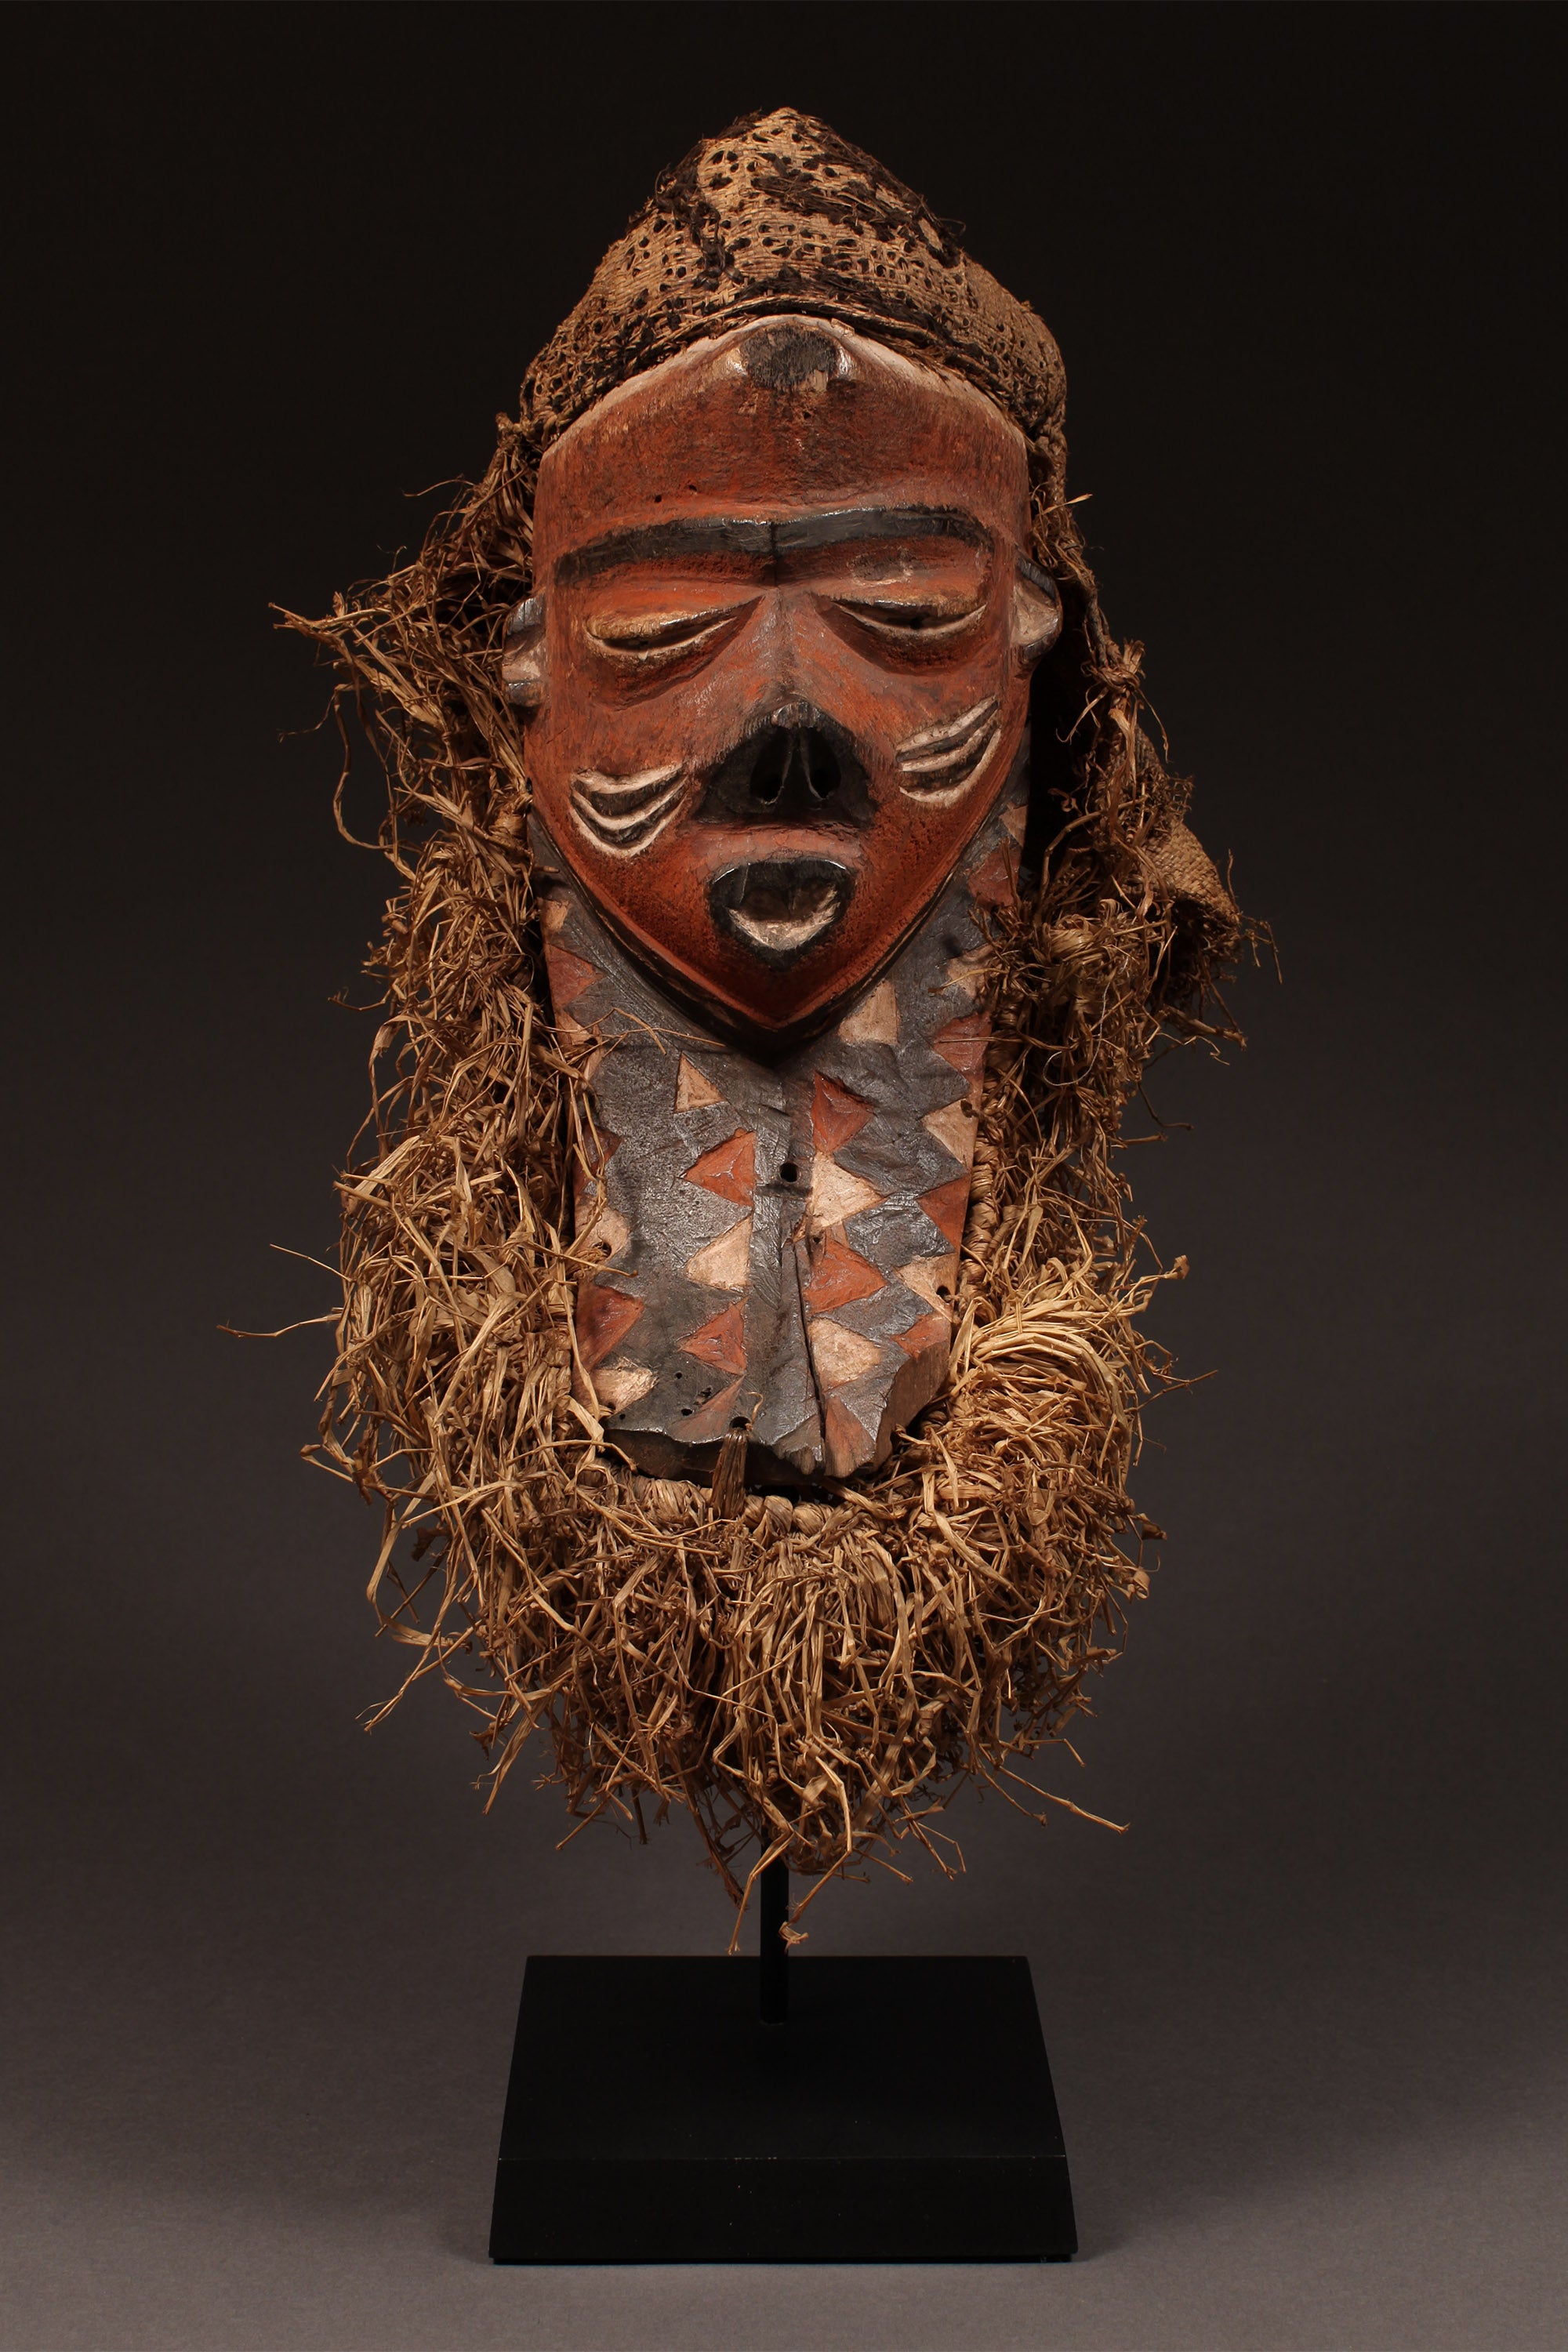 Tribal Masks - Handcrafted - Pende Masks - Traditional Folk Art - African Artifacts Sculptures - African Art Collector - Experience the unique artistry and culture of the Pende Tribe with this beautiful forehead mask. Crafted from wood, it is a perfect blend of traditional and modern, highlighting the skill and artistic heritage of the D.R Congo.